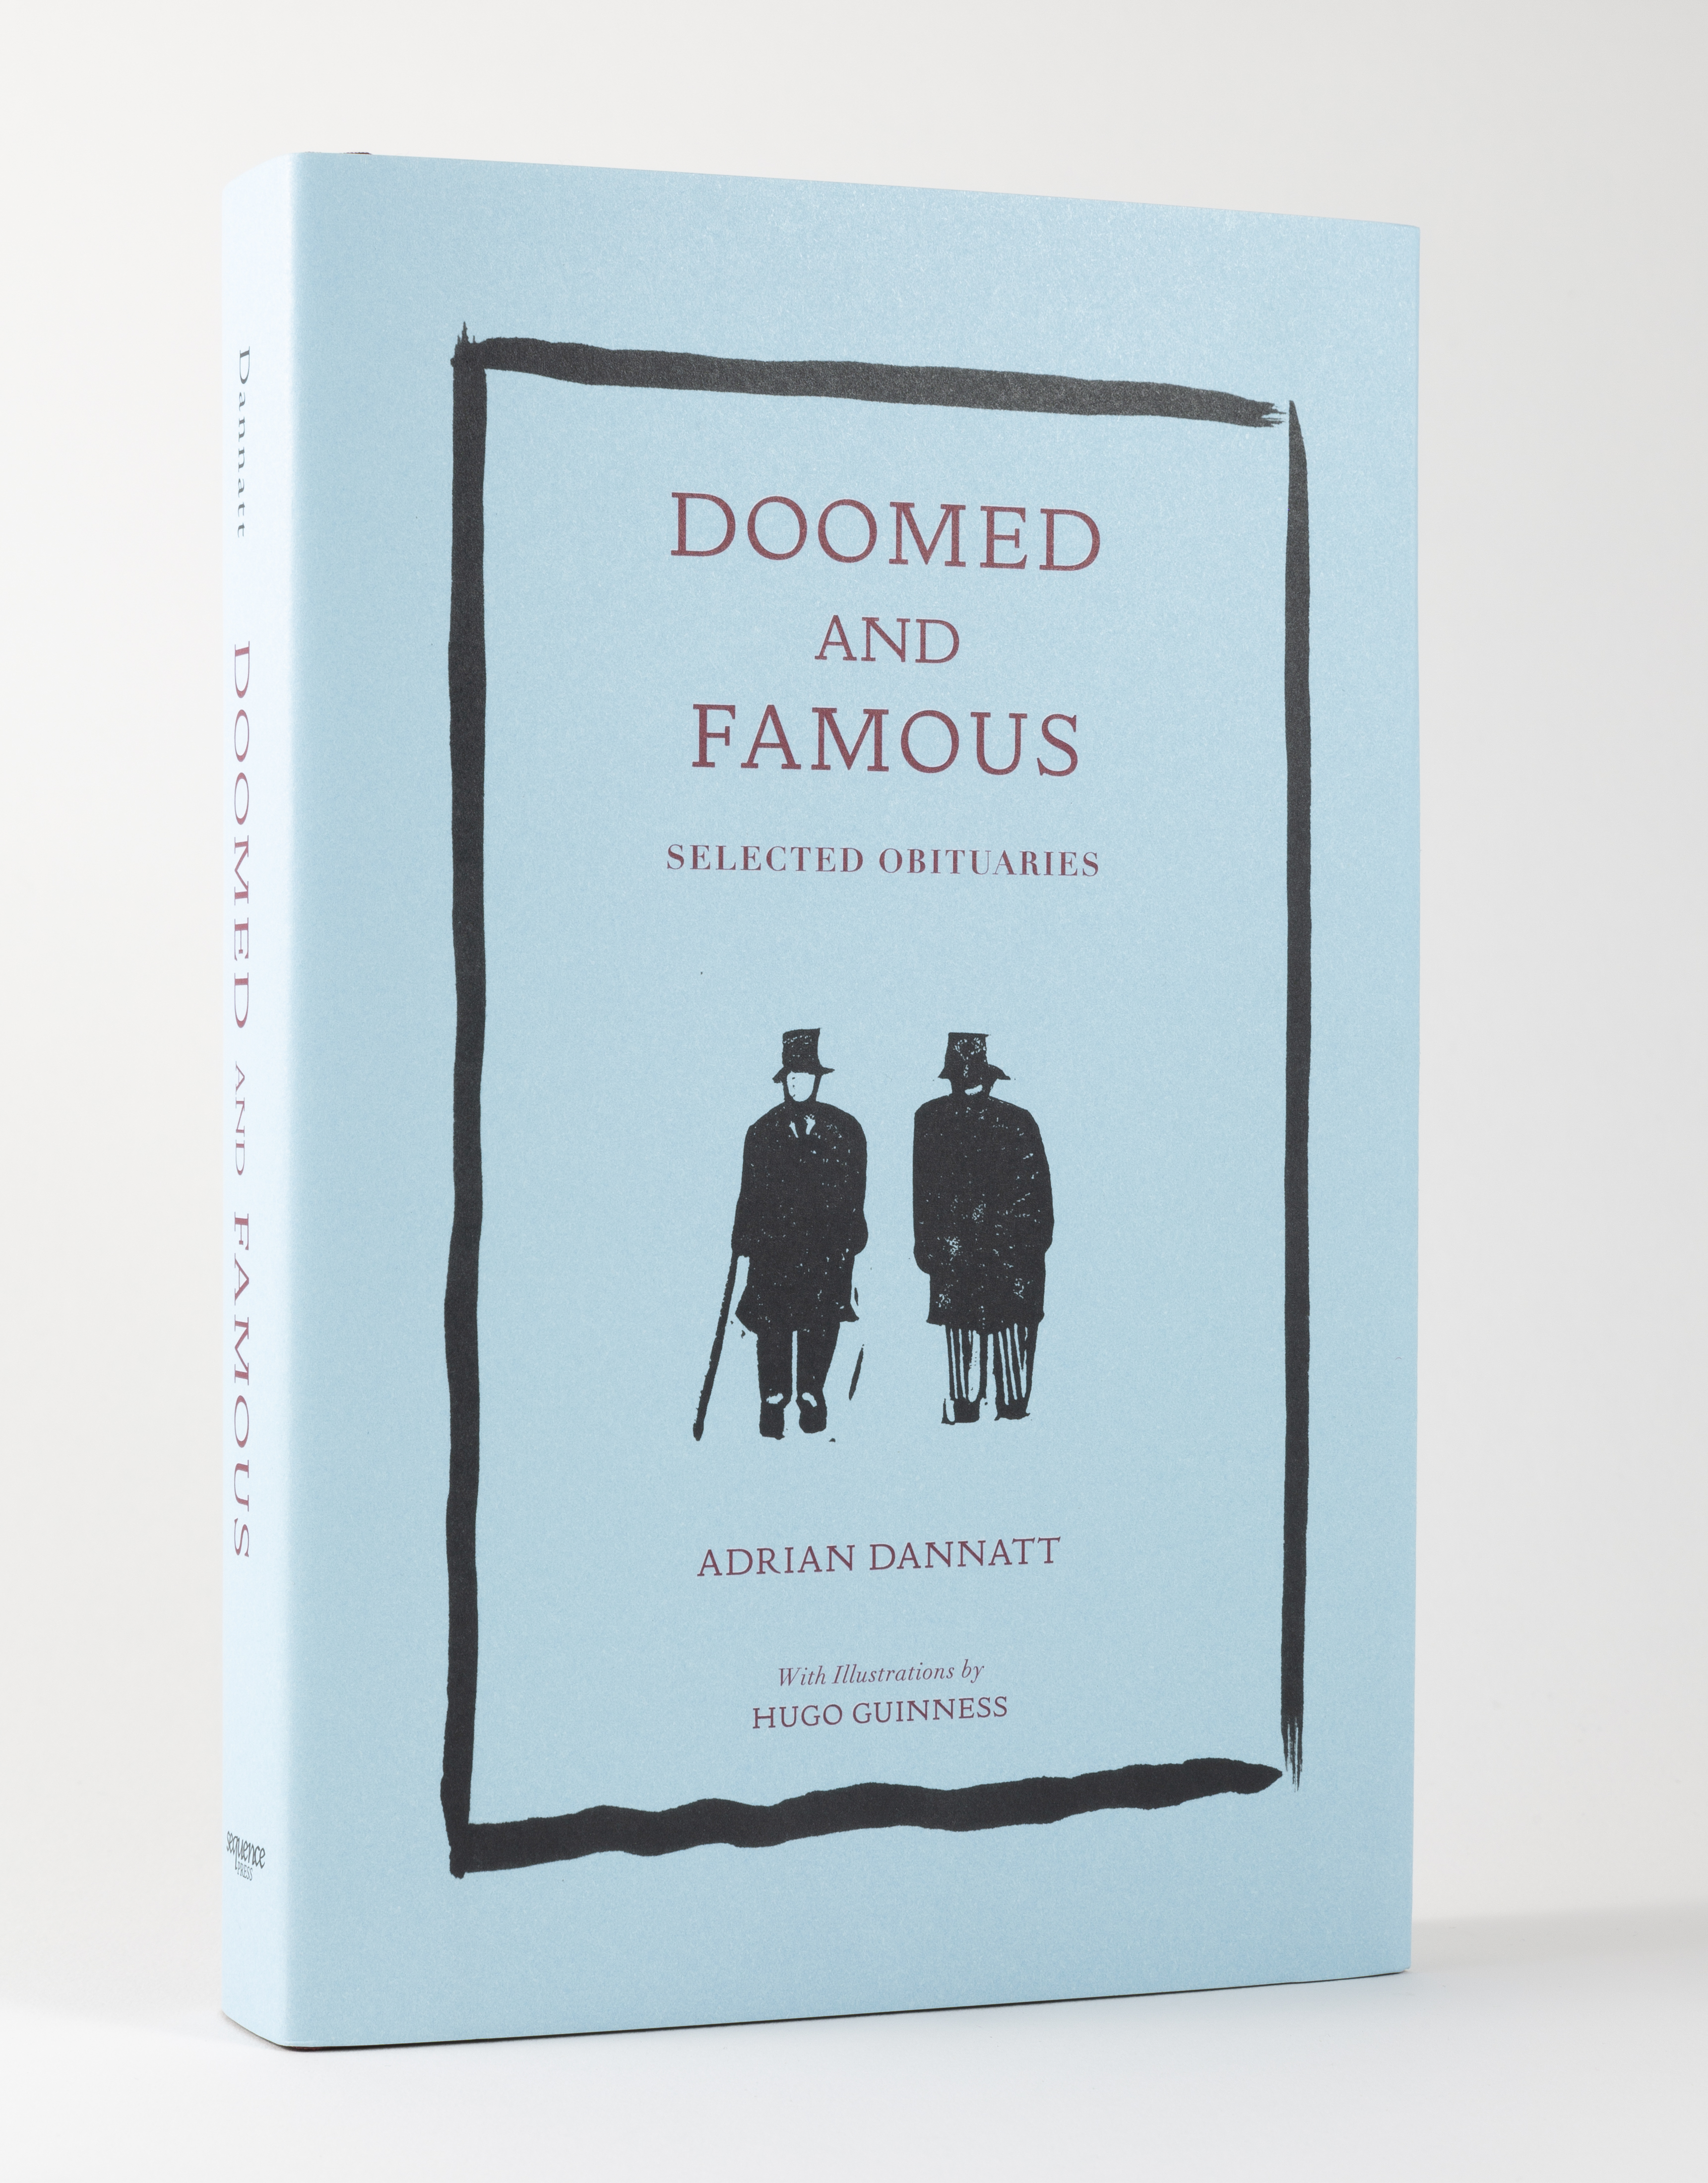 Adrian Dannatt&#039;s &quot;Doomed and Famous&quot; with Illustrations by Hugo Guinness (Sequence Press, 2021)